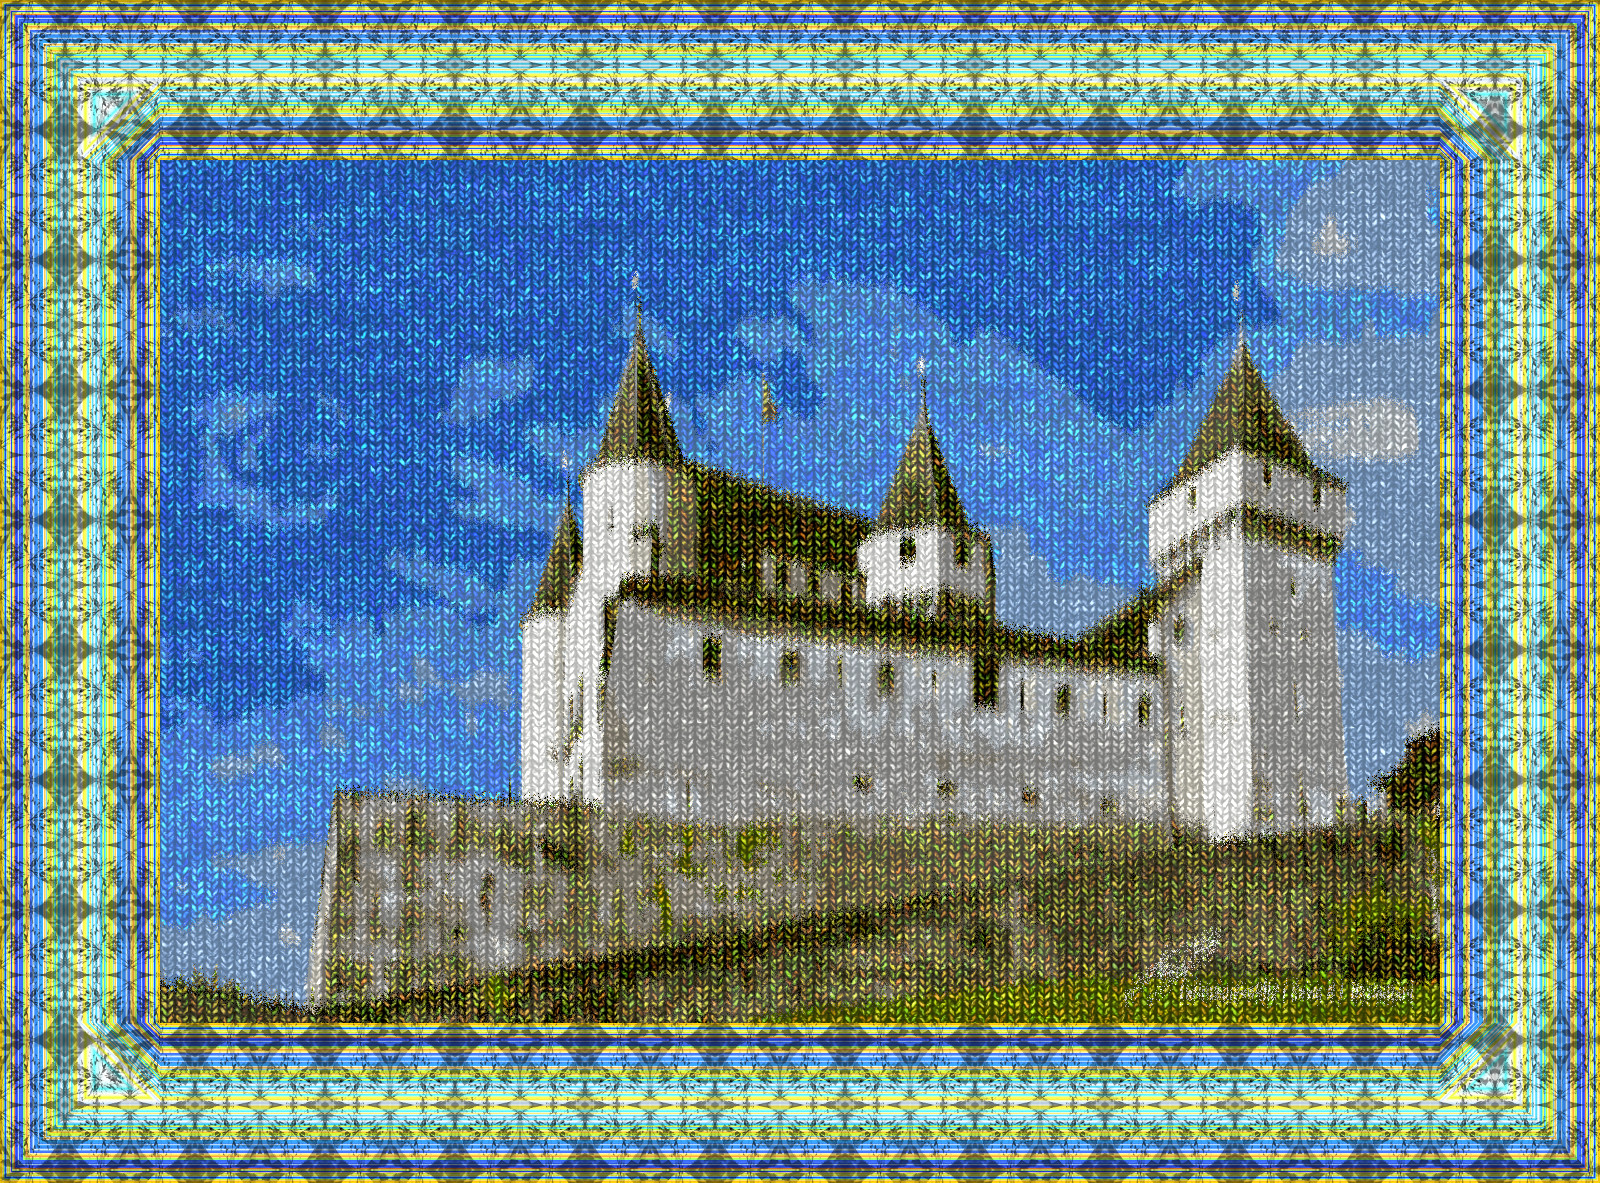 2019-05-29 13-36-45 chateau_de_nyon_vue_sud_est_2019_by_leptitsuisse1912_dd7yunj-fullview as a simple knitting (framed).jpg